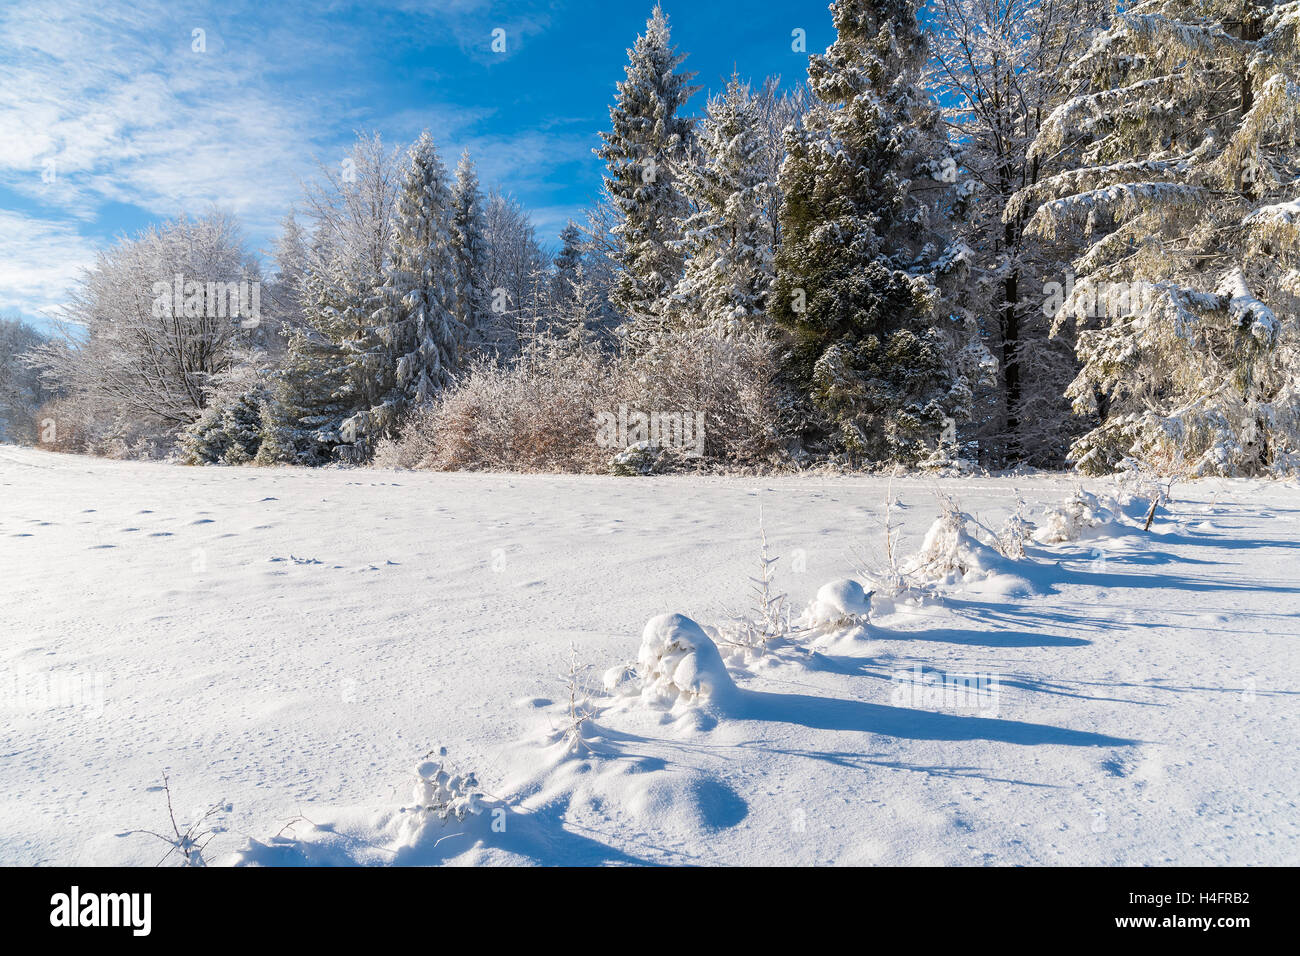 Winter trees in Beskid Sadecki Mountains and sunny blue sky, Poland Stock Photo